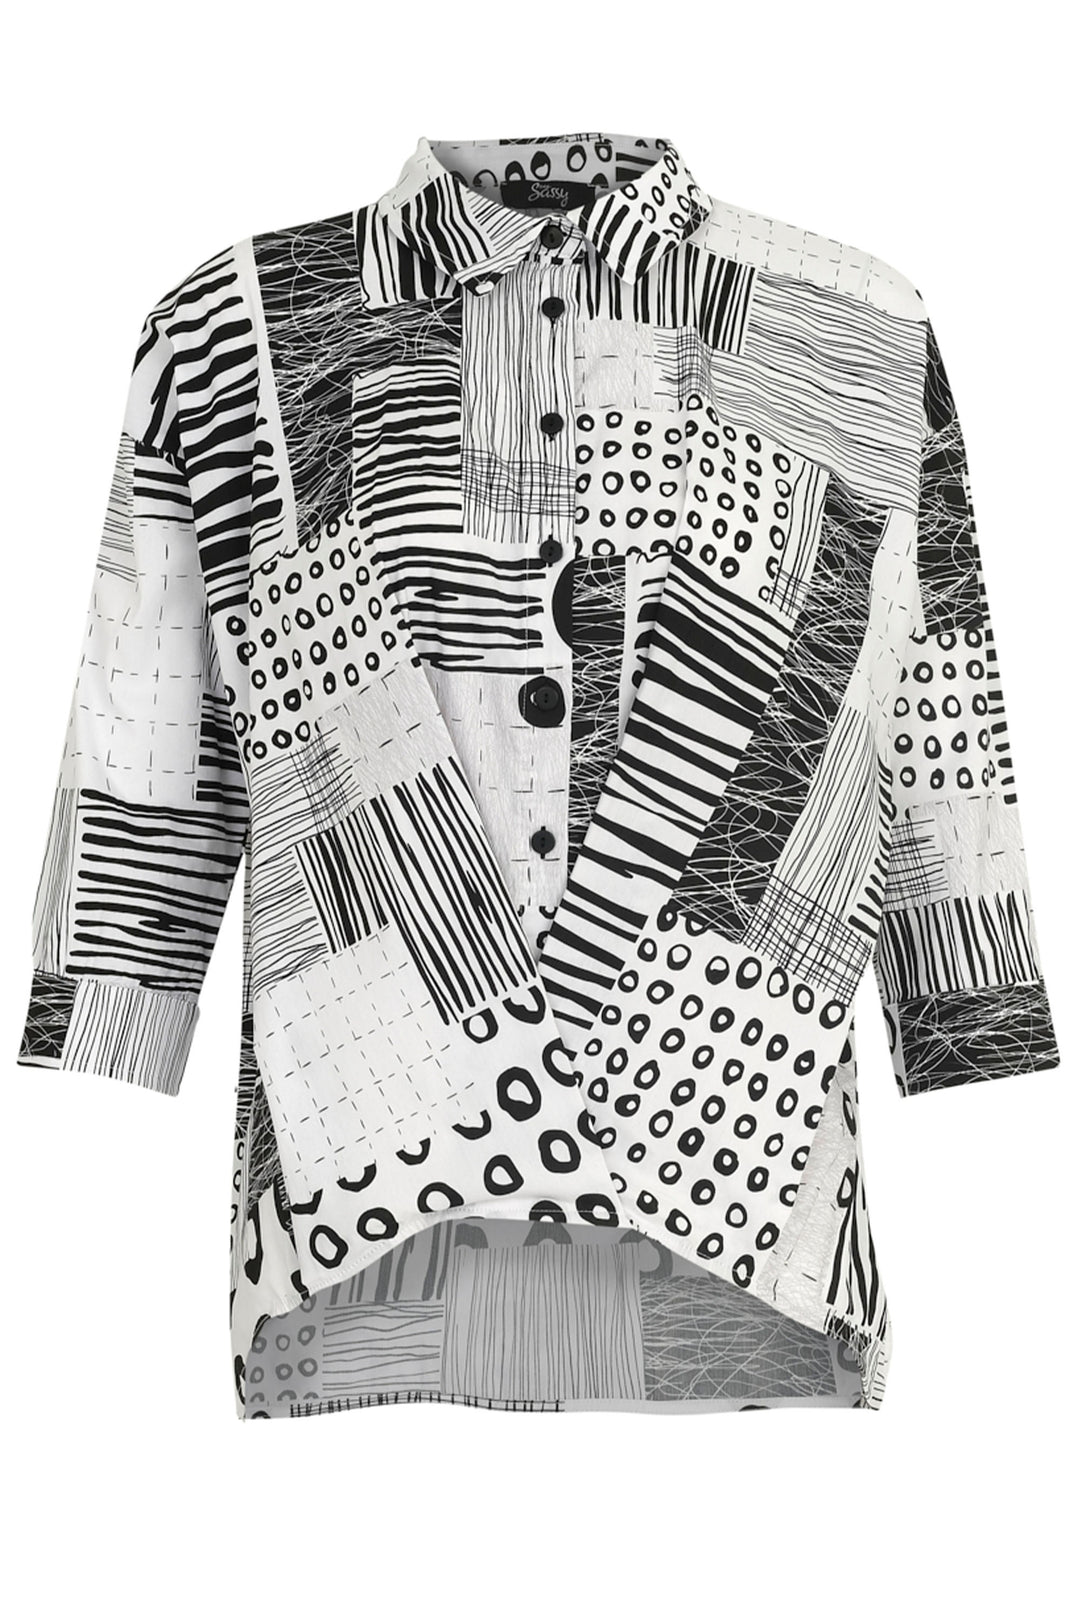 Every Sassy Spring 2024 Made with soft fabric for a loose feel, this top features front button down design and dolman sleeves. The neat modern art abstract print adds a touch of bold style, while the classic collar gives it a standard look. 